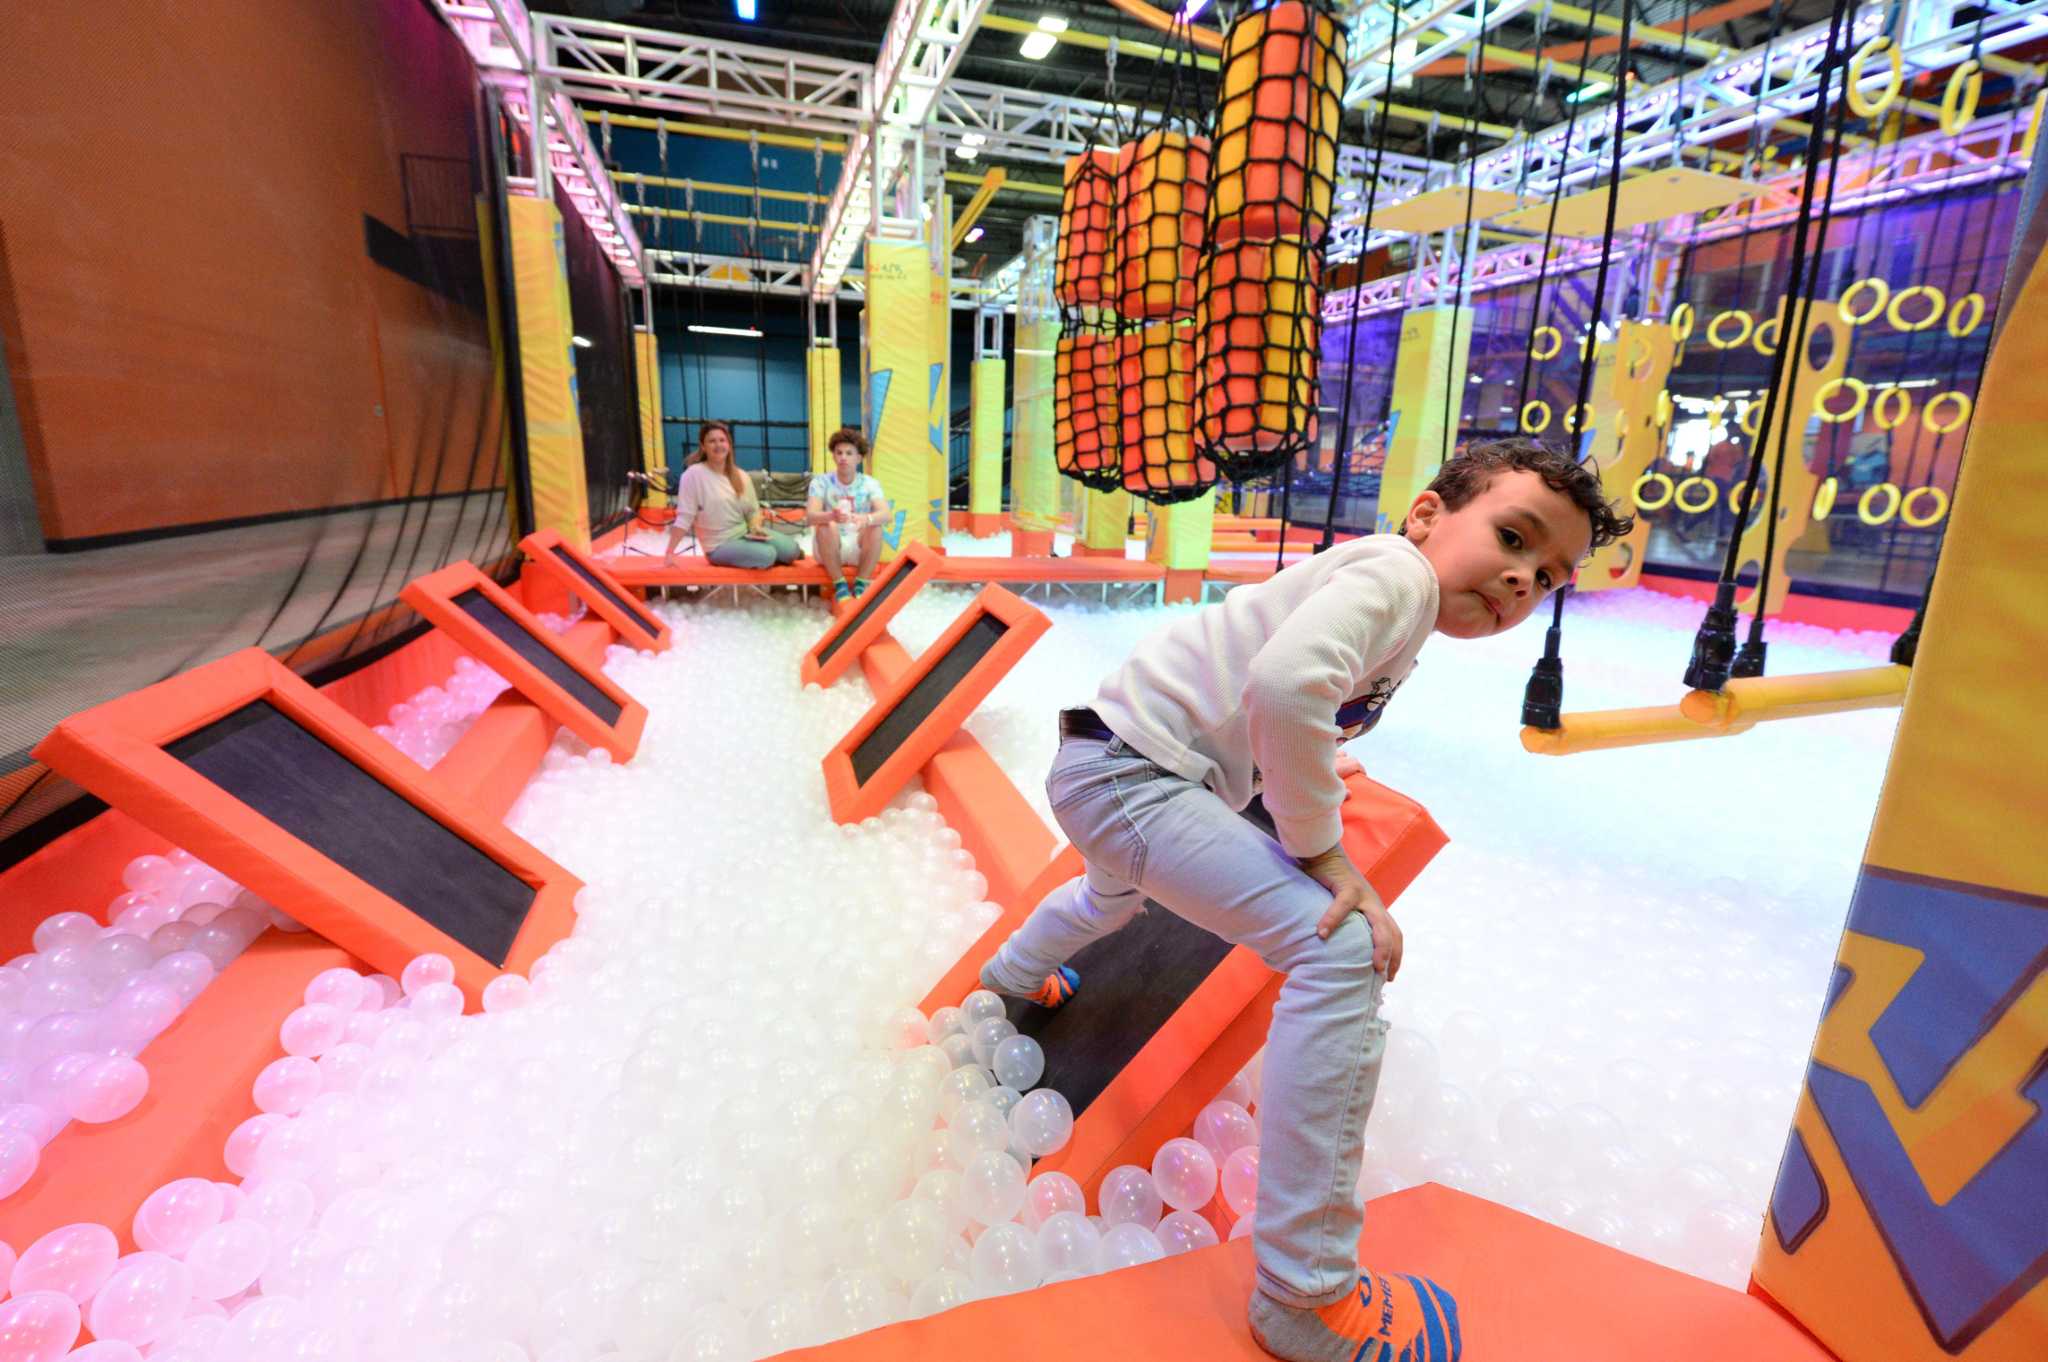 Urban Air Trampoline Park reopens under new management safety protocols